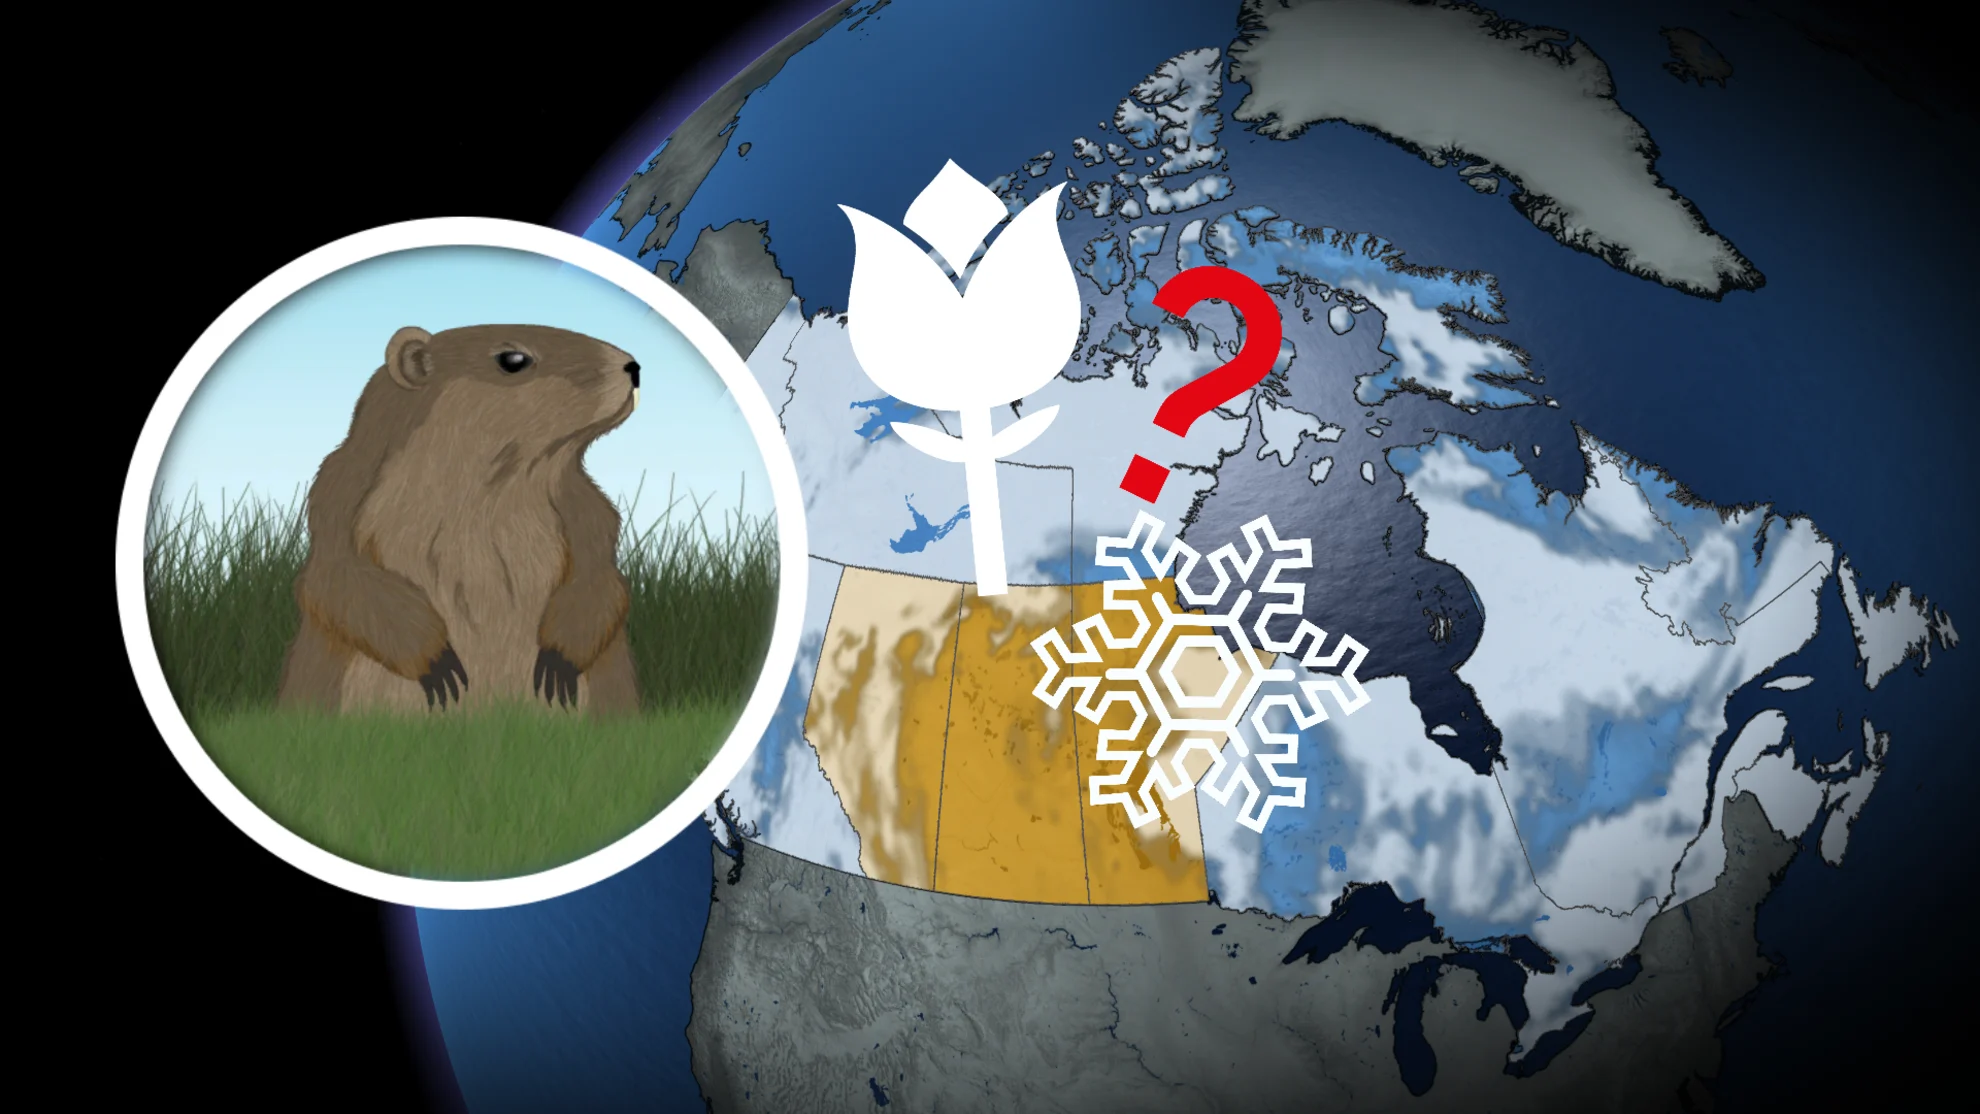 This Groundhog Day forecast may spoil Friday's predictions